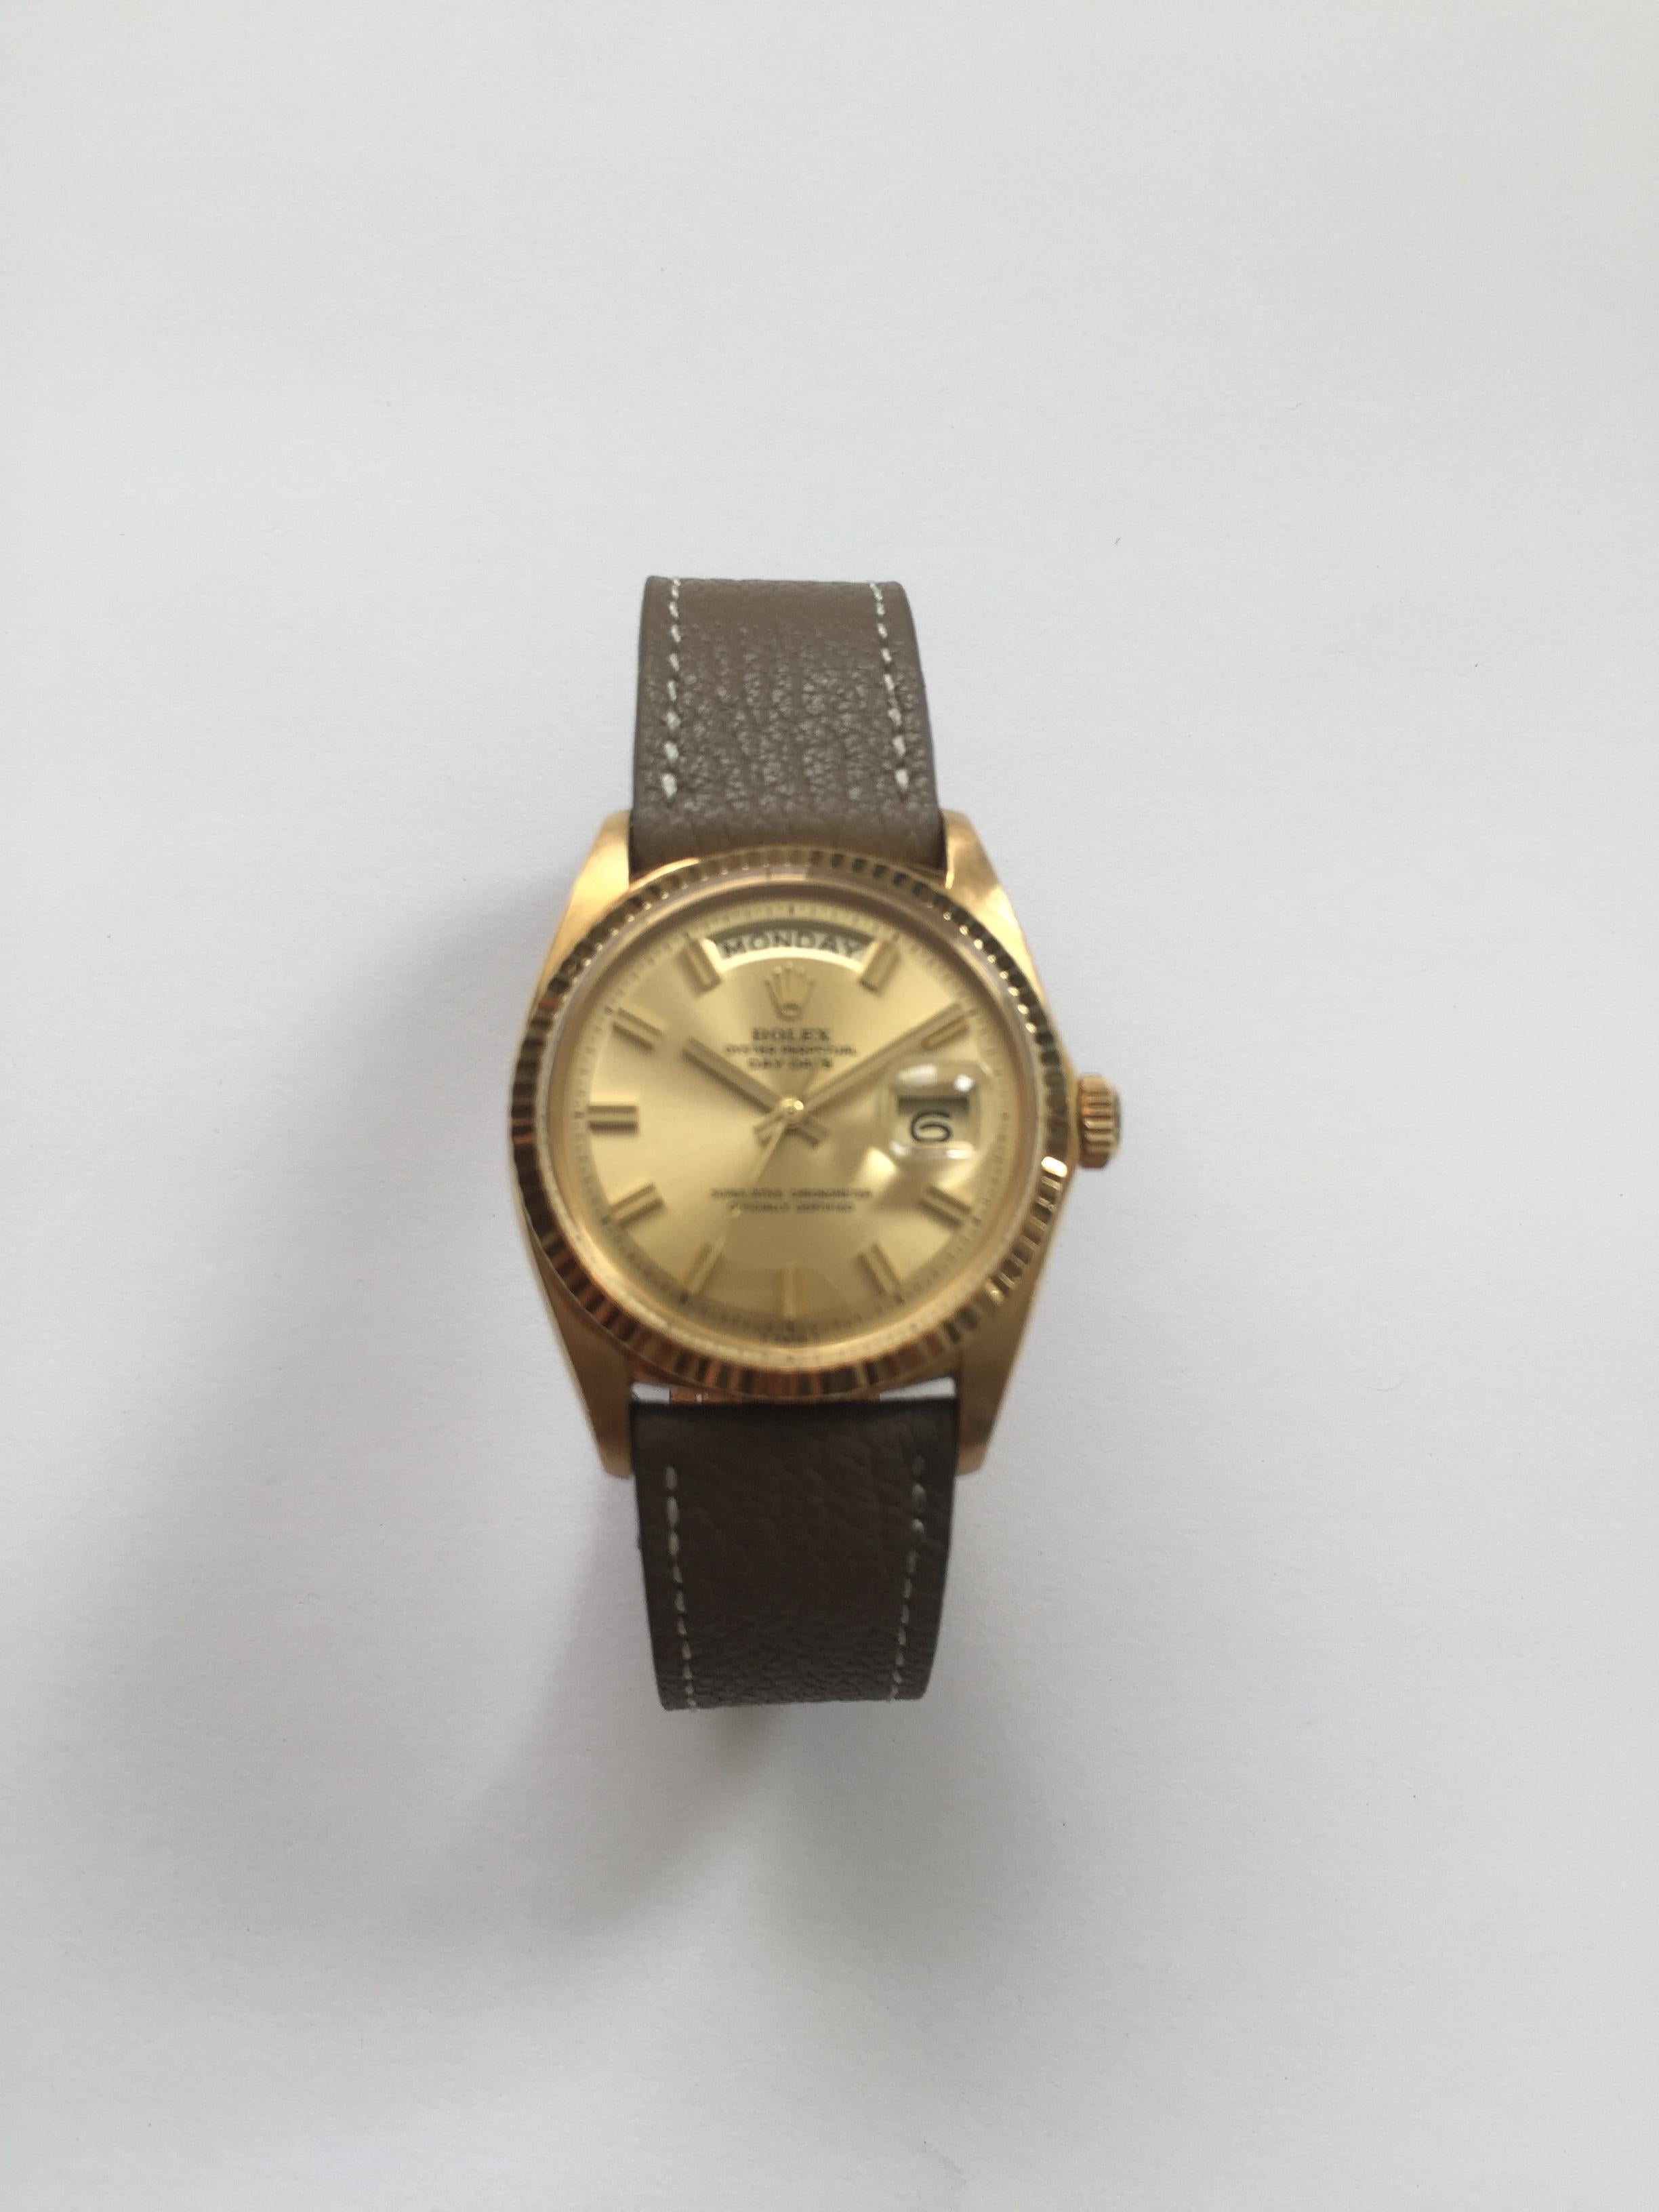 Rolex 18K Yellow Gold Oyster Perpetual Day-Date Automatic Watch
Rare Factory Champagne Non-Luminous 'Wide-Boy' Dial with Matching 'Wide-Boy' Hands.
Yellow Gold Gold Fluted Bezel
18K Yellow Gold Case
36mm in size 
Features Rolex Automatic Movement